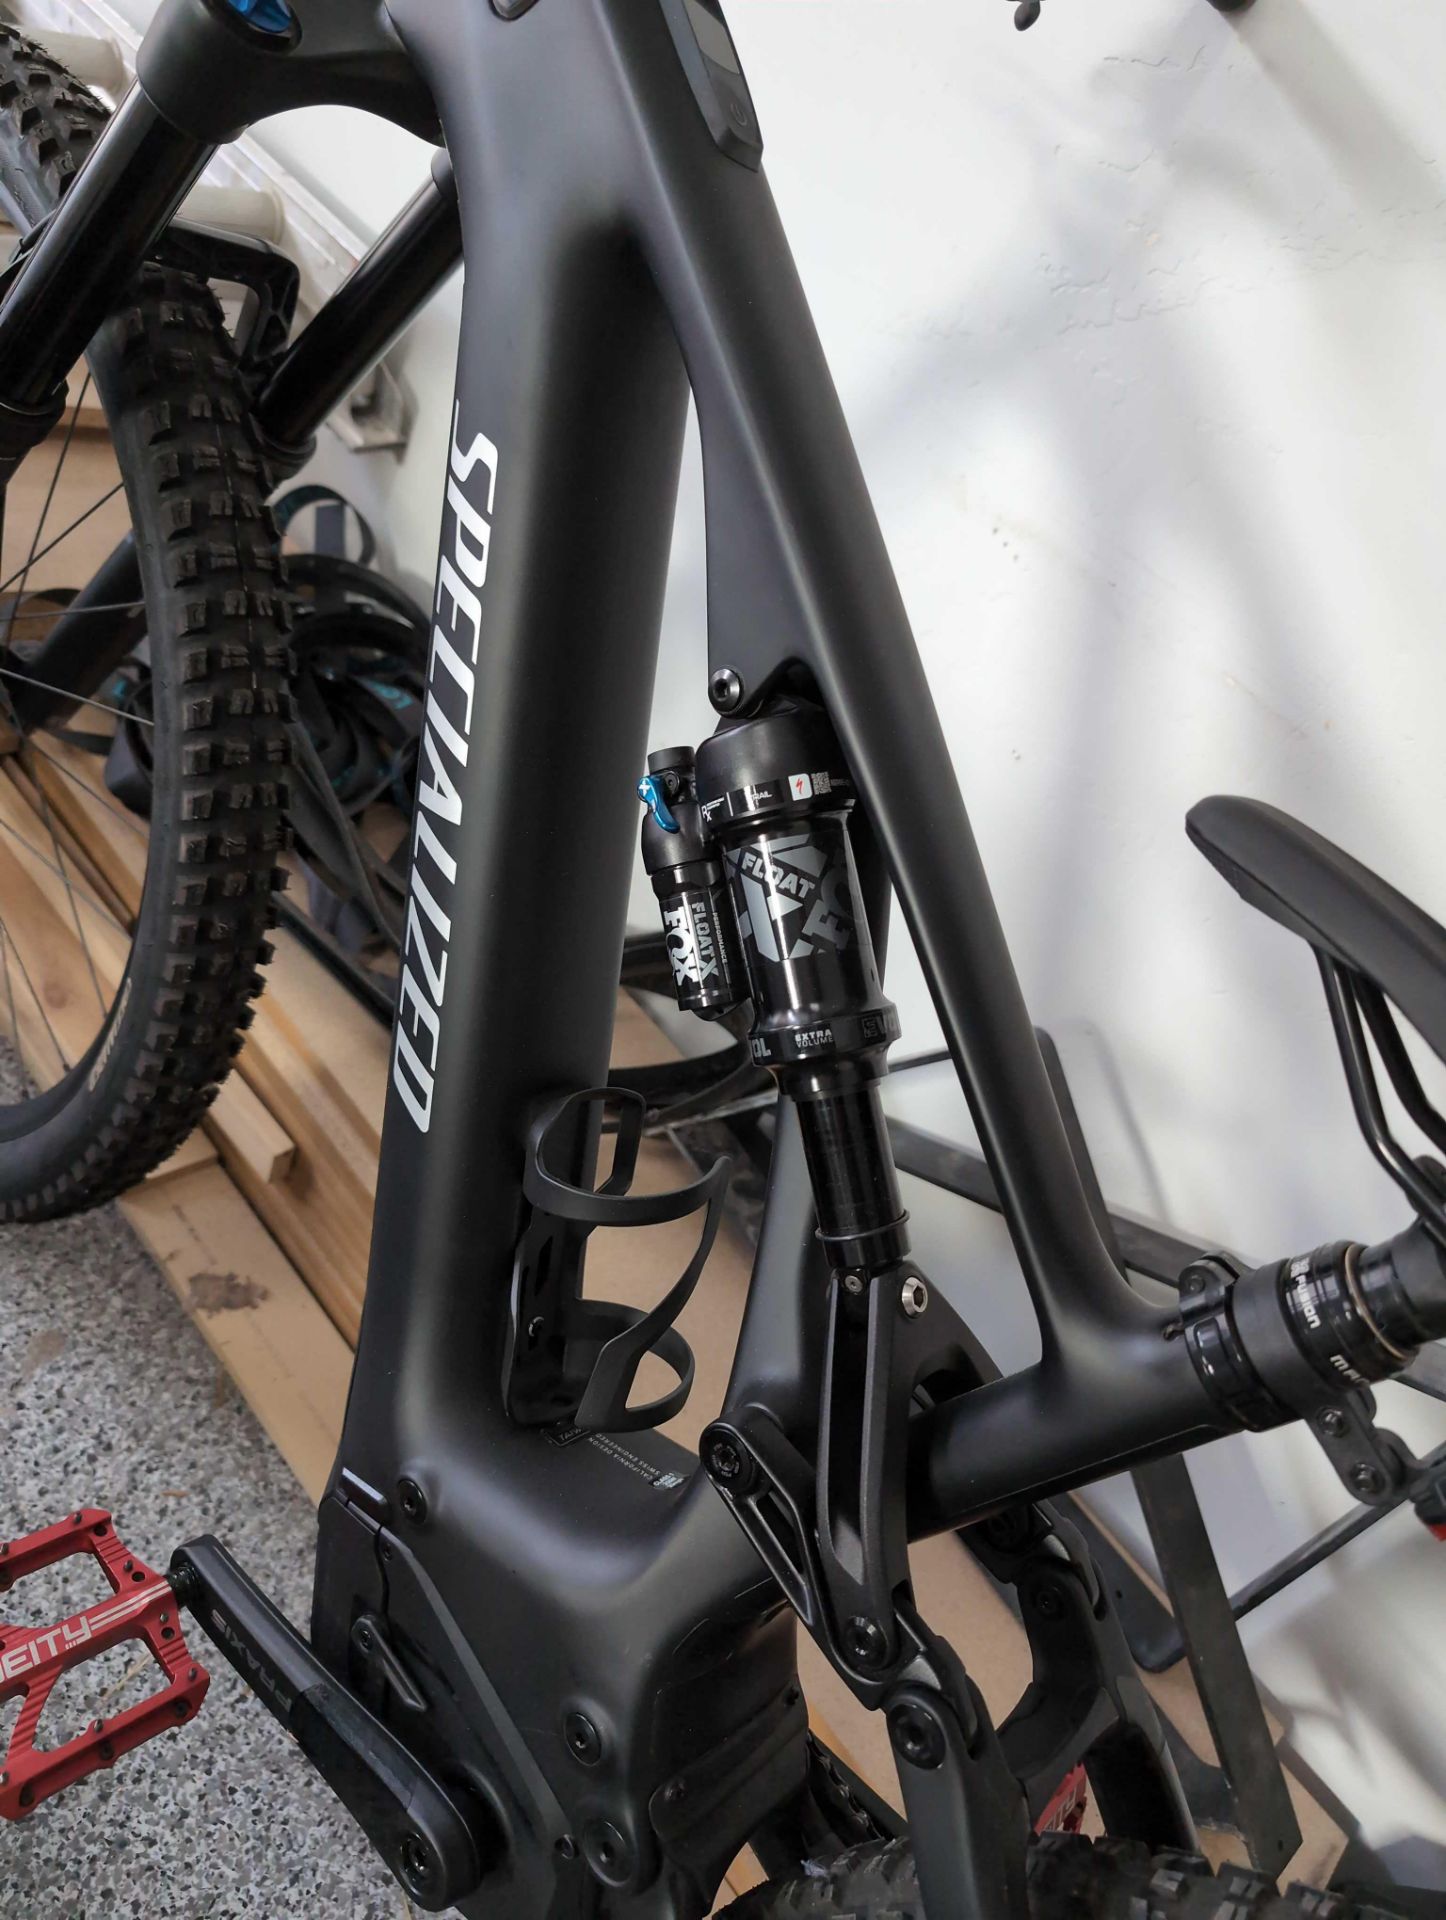 specialized ebike - Image 4 of 24